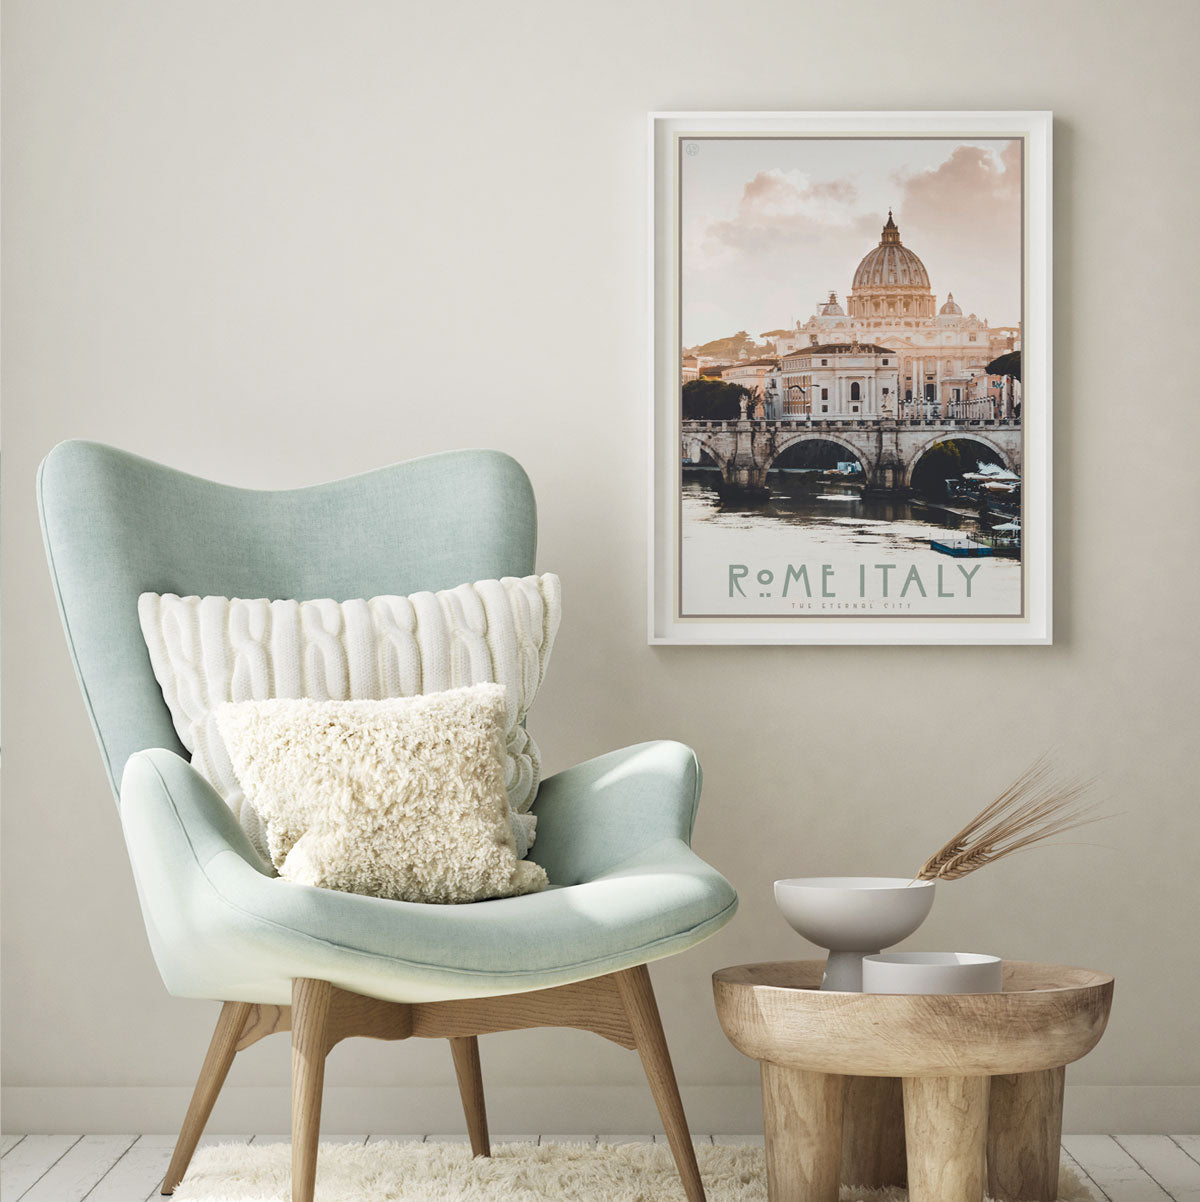 Rome vintage style travel print, tourism poster, vintage poster by Places we luv